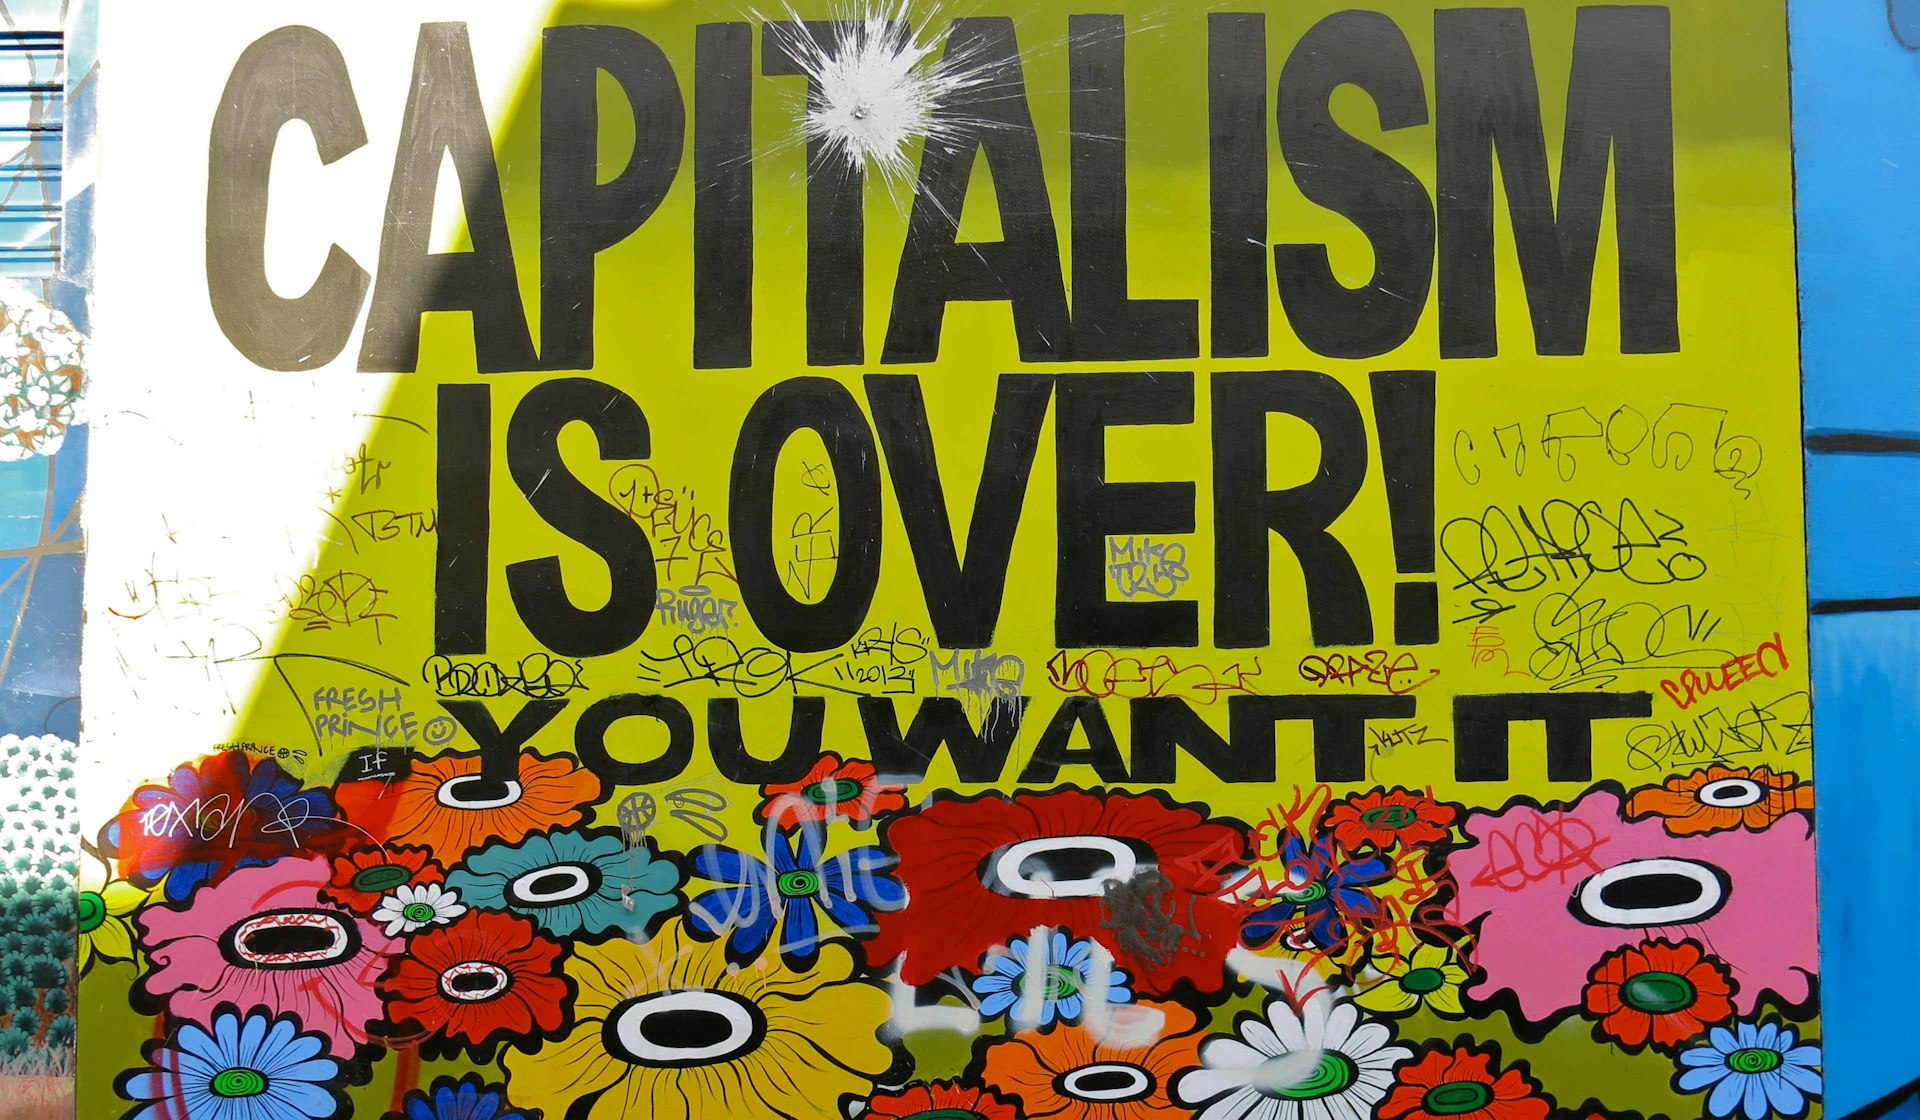 Five postcapitalist projects that offer a blueprint for a new world